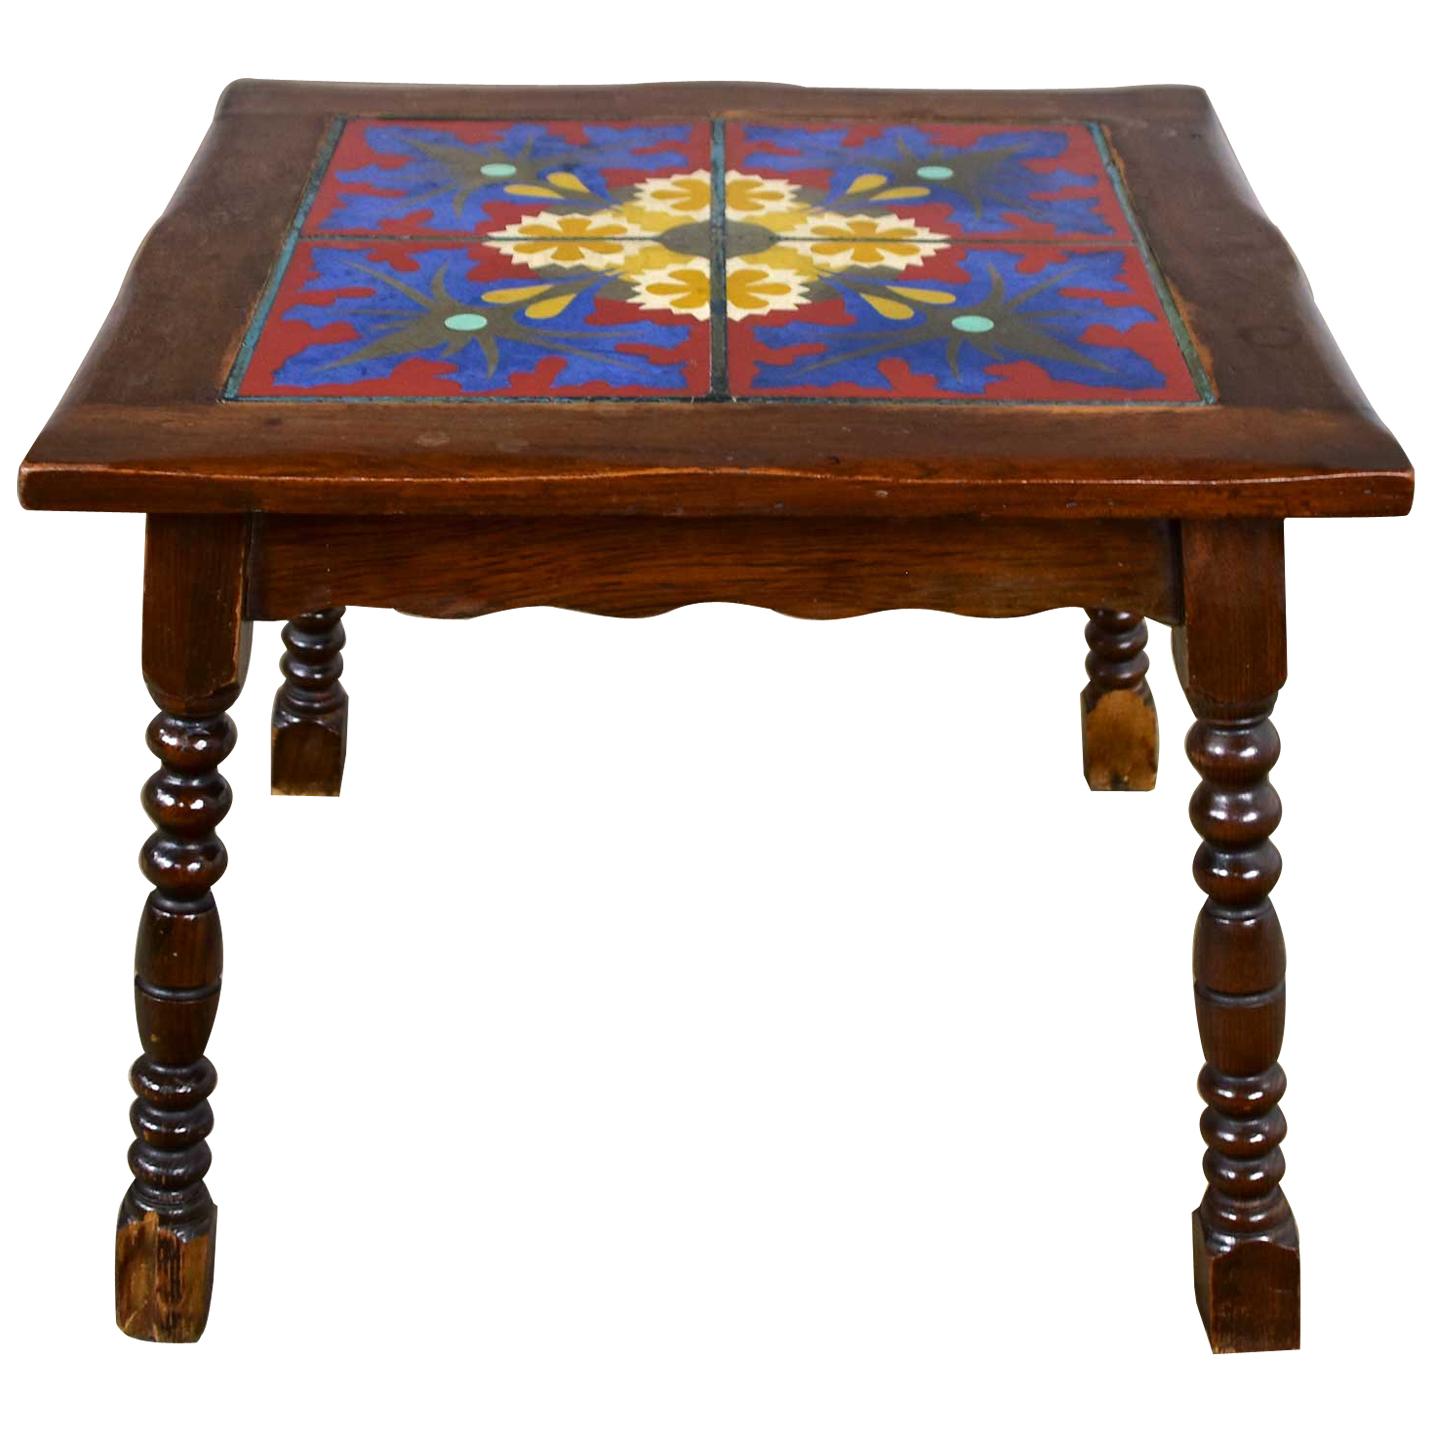 Table d'appoint Catalina California ou Mission Arts & Craft Style Spanish Tile Top